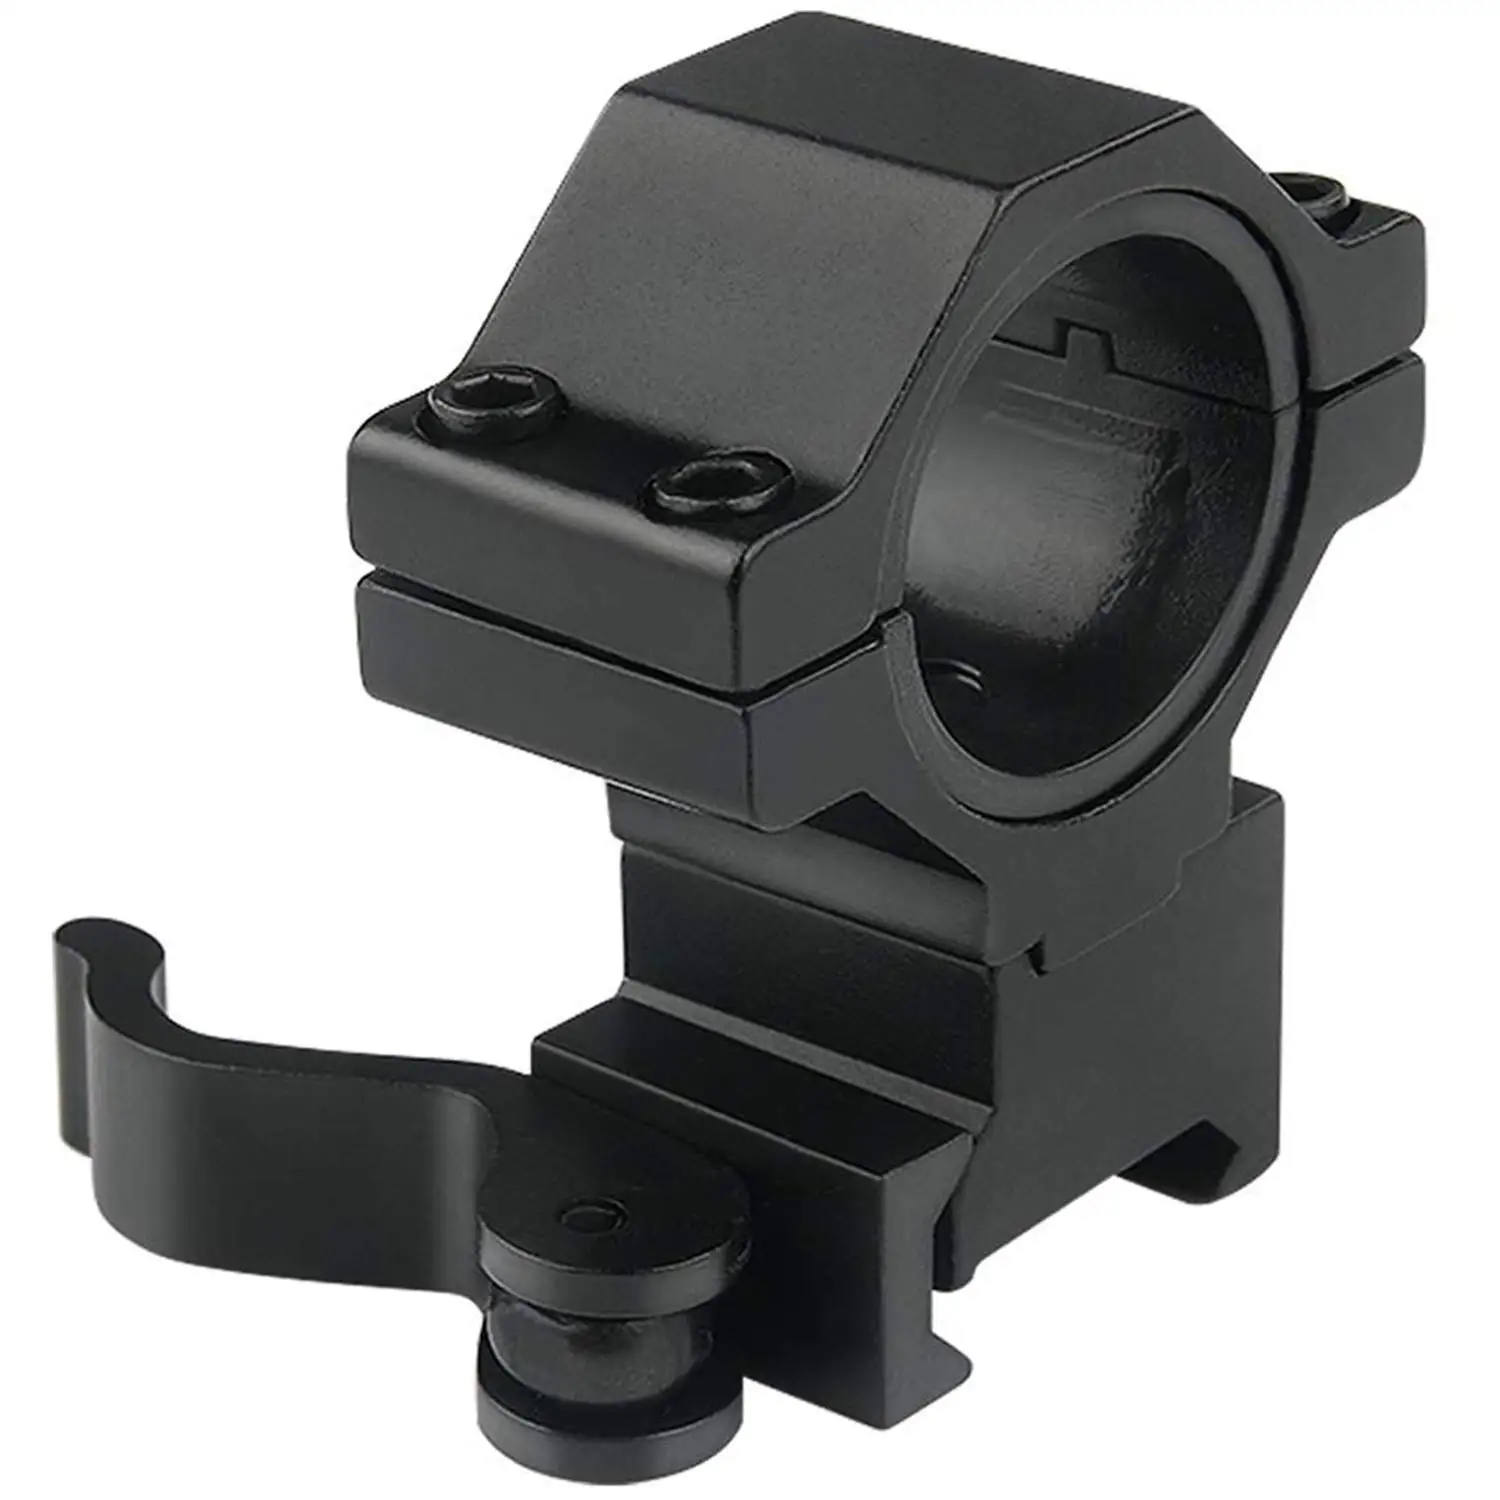 

UniqueFire QD quick release 1 "25.4mm / 30mm Scope ring low profile 20mm Dovetail dovetail Picatinny rail mounting rings